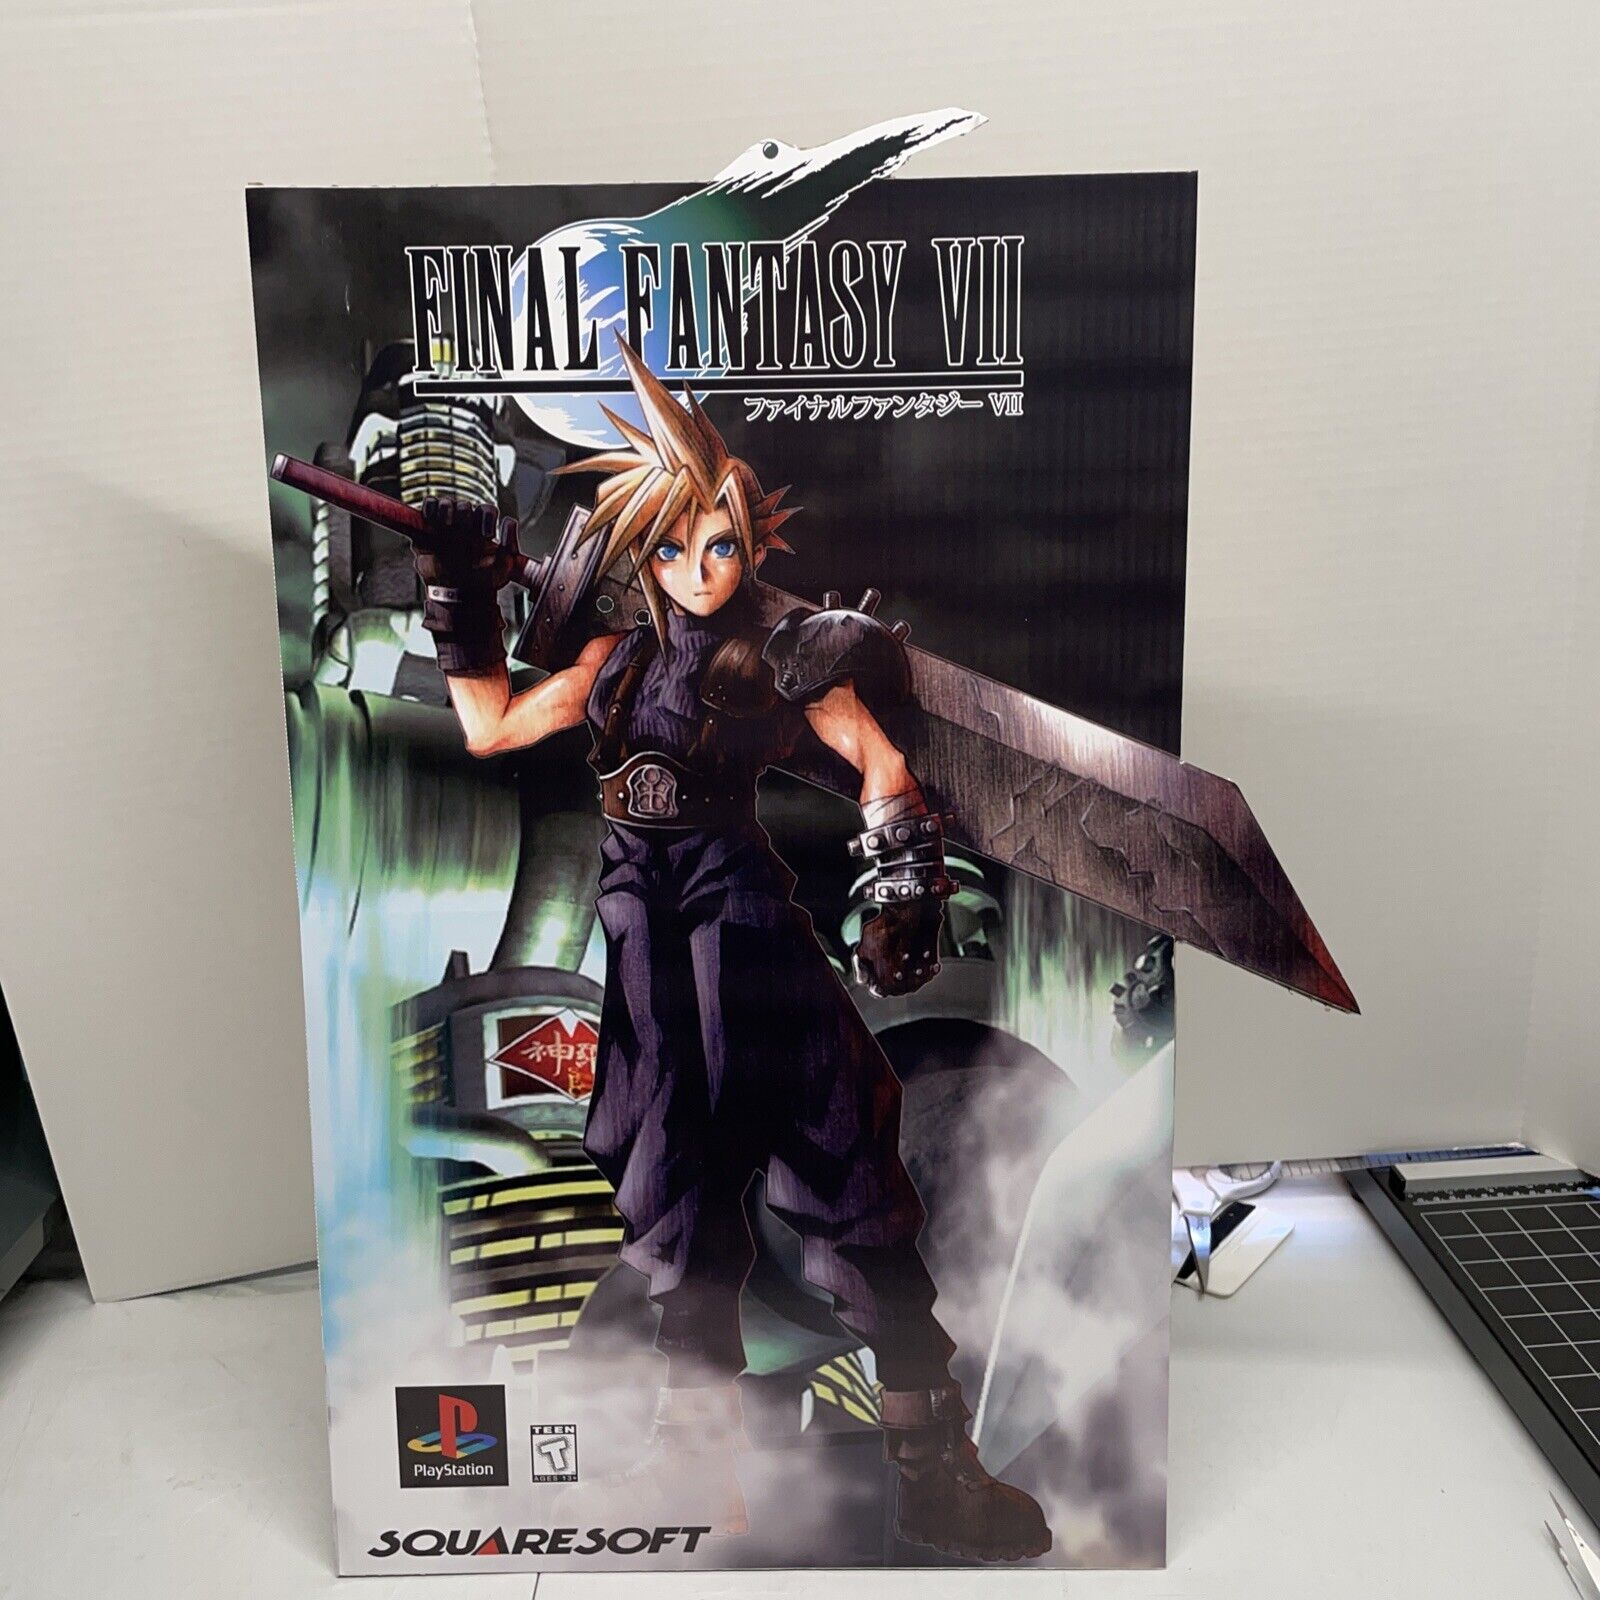 Final Fantasy VII 7  Repro Standee Game Room Art Promo-like  Sign Ps1 19x26”